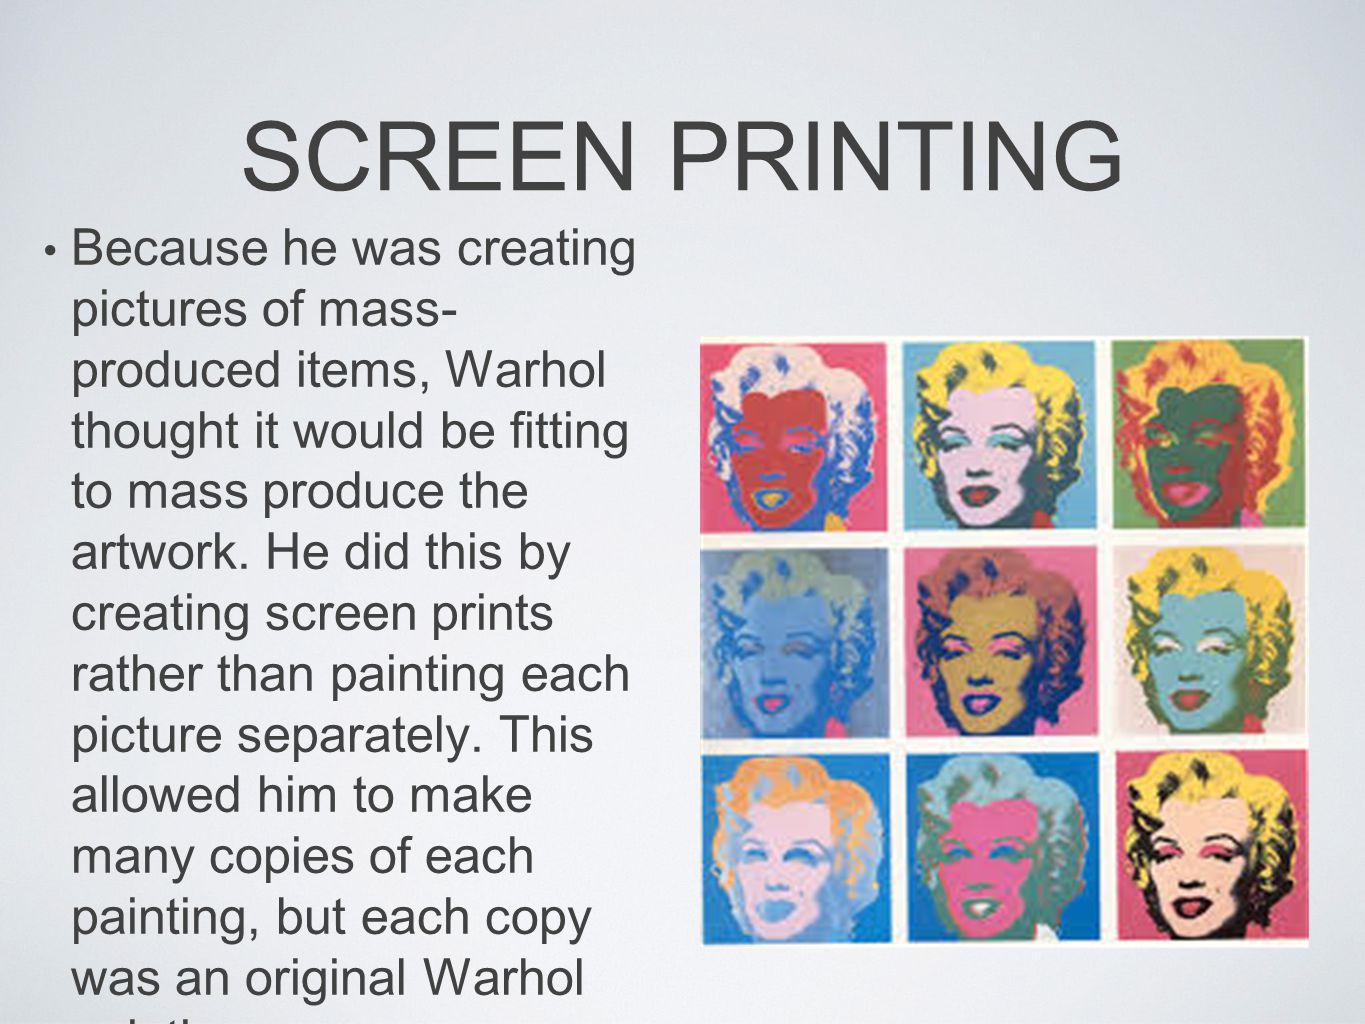 SCREEN PRINTING Because he was creating pictures of mass- produced items, Warhol thought it would be fitting to mass produce the artwork.